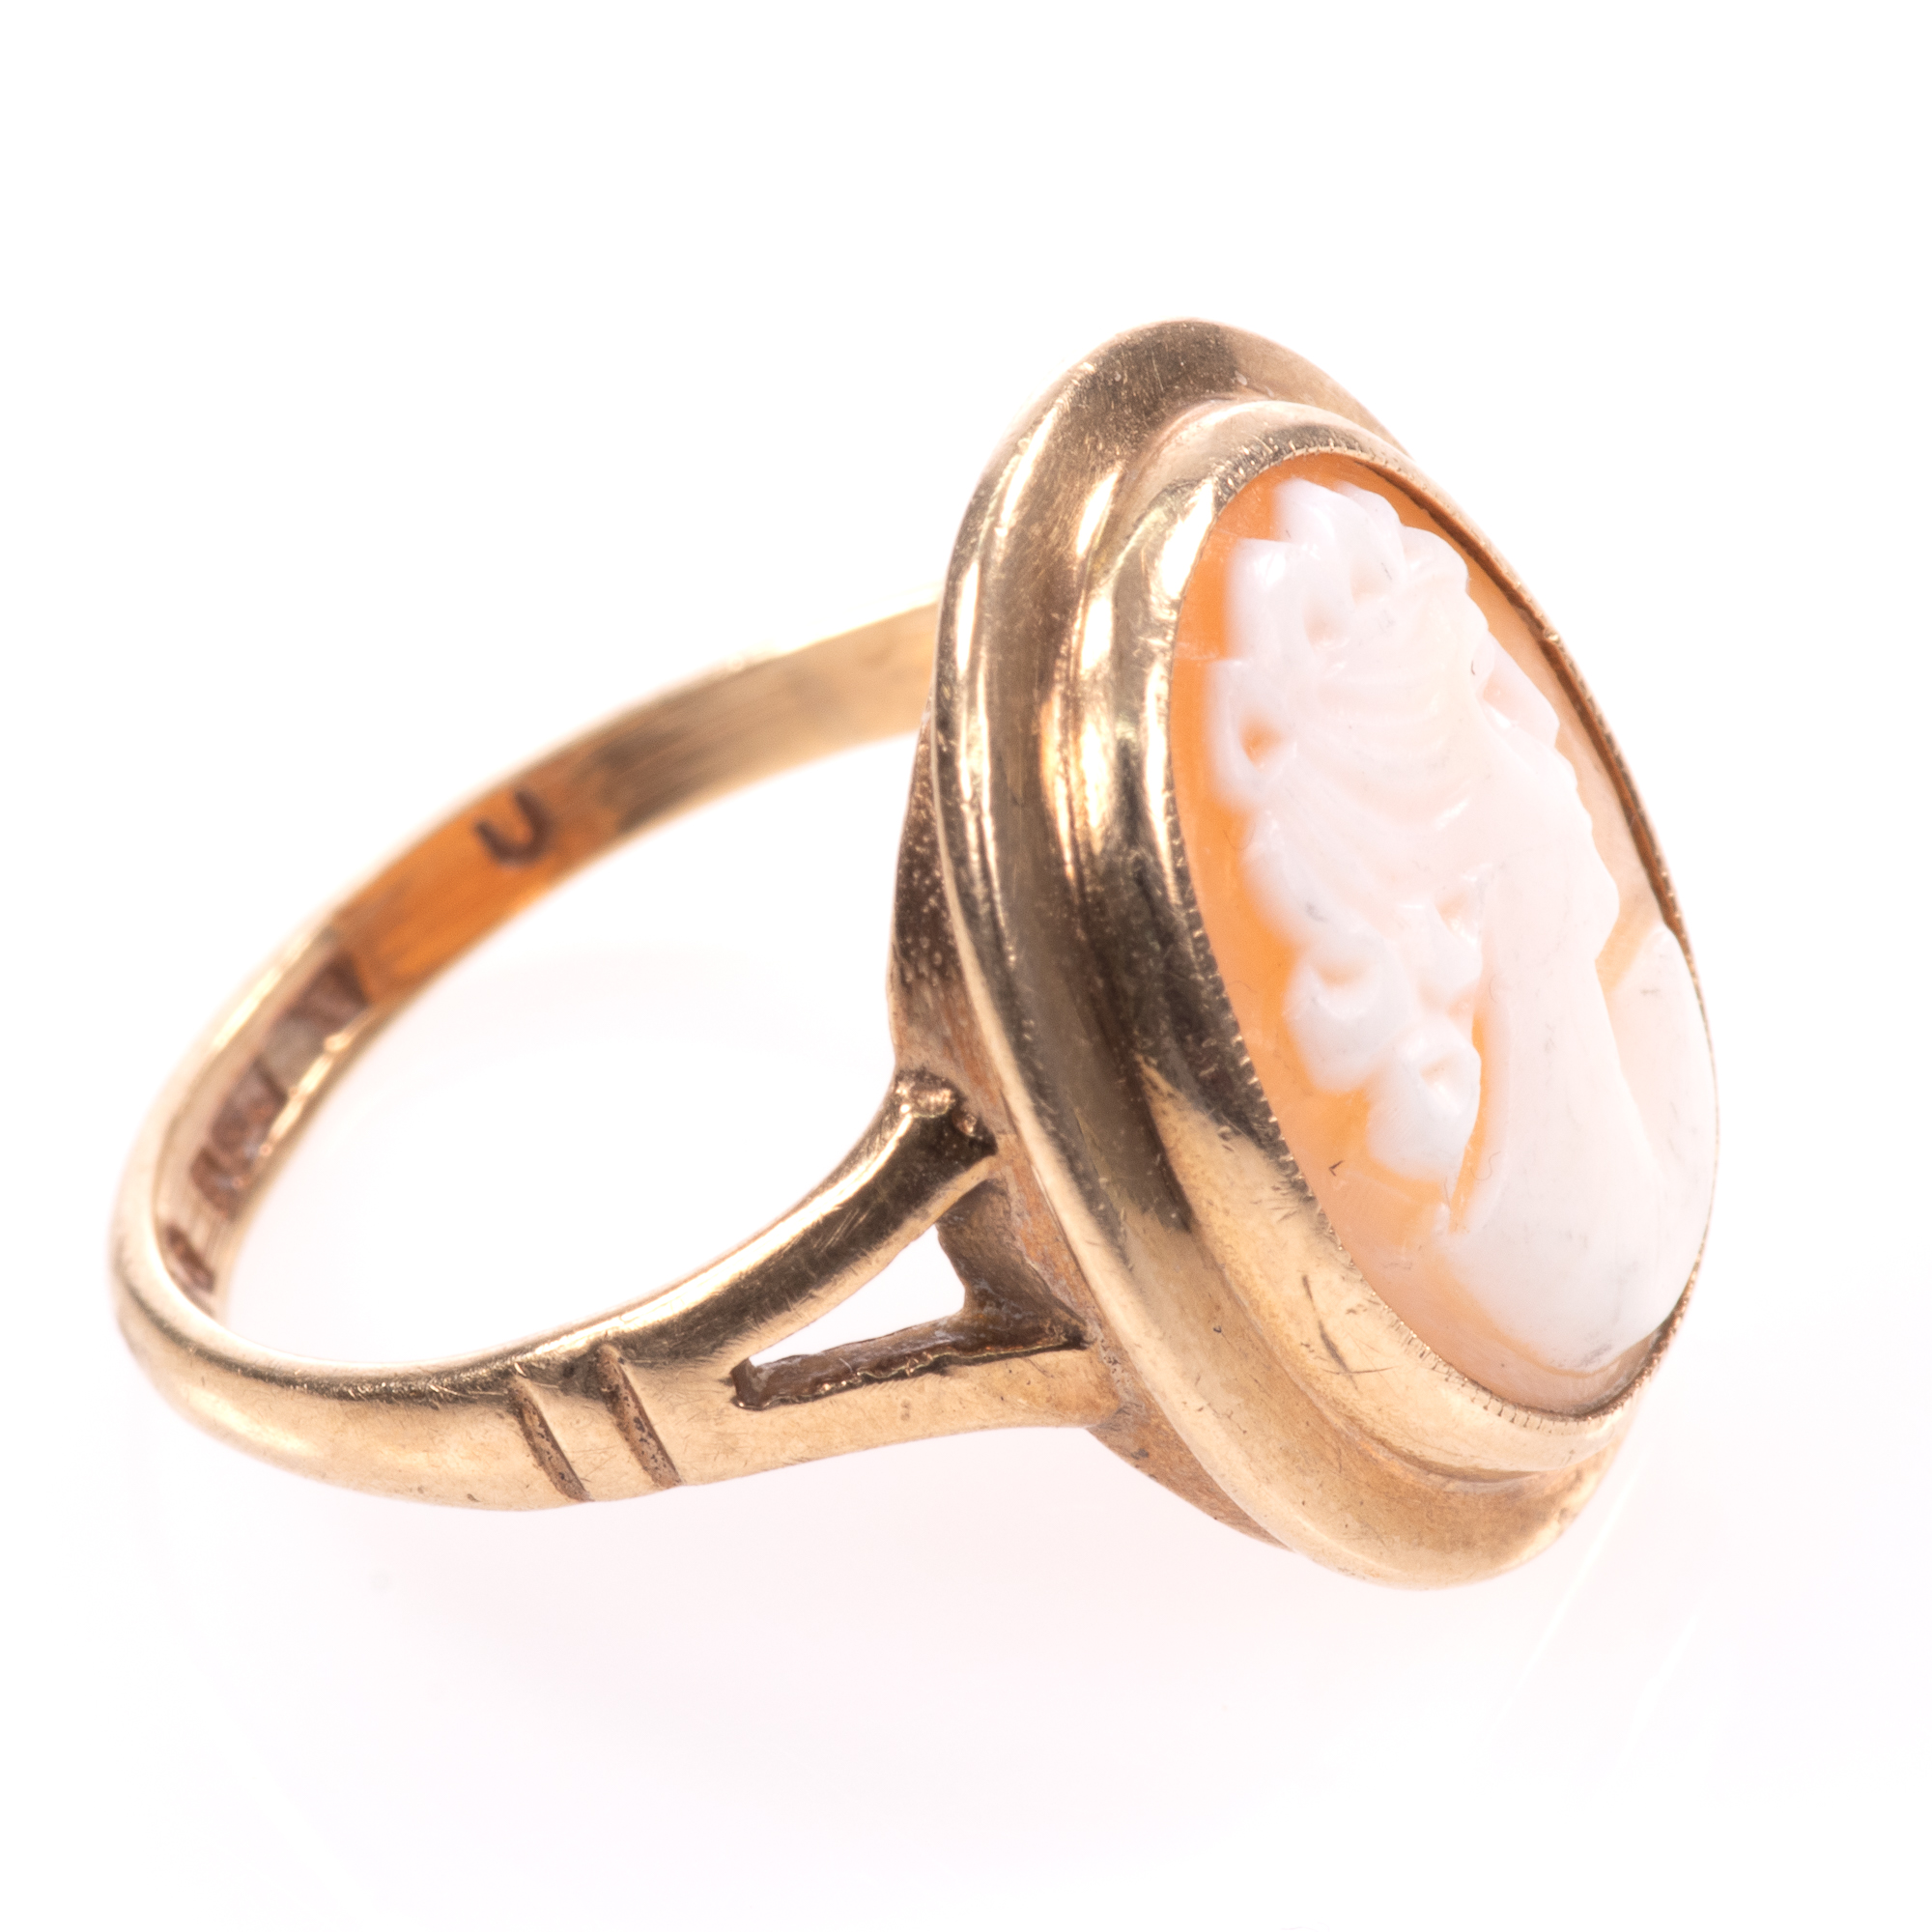 9ct Gold Classical Cameo Ring - Image 7 of 7